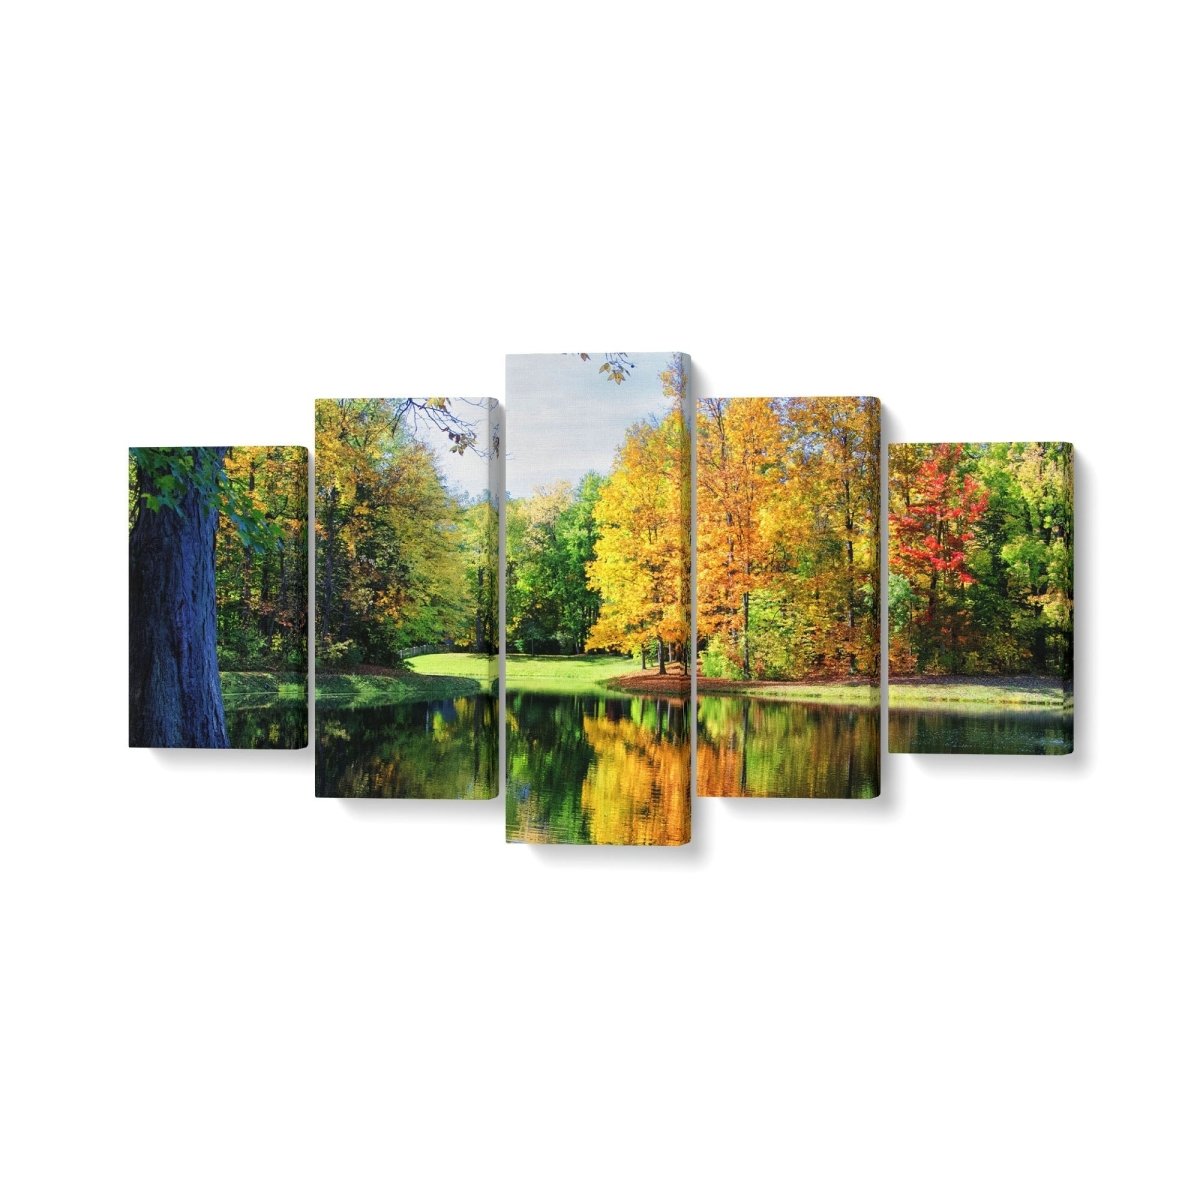 Tablou MultiCanvas 5 piese Colorful Trees Reflections - clevny.ro